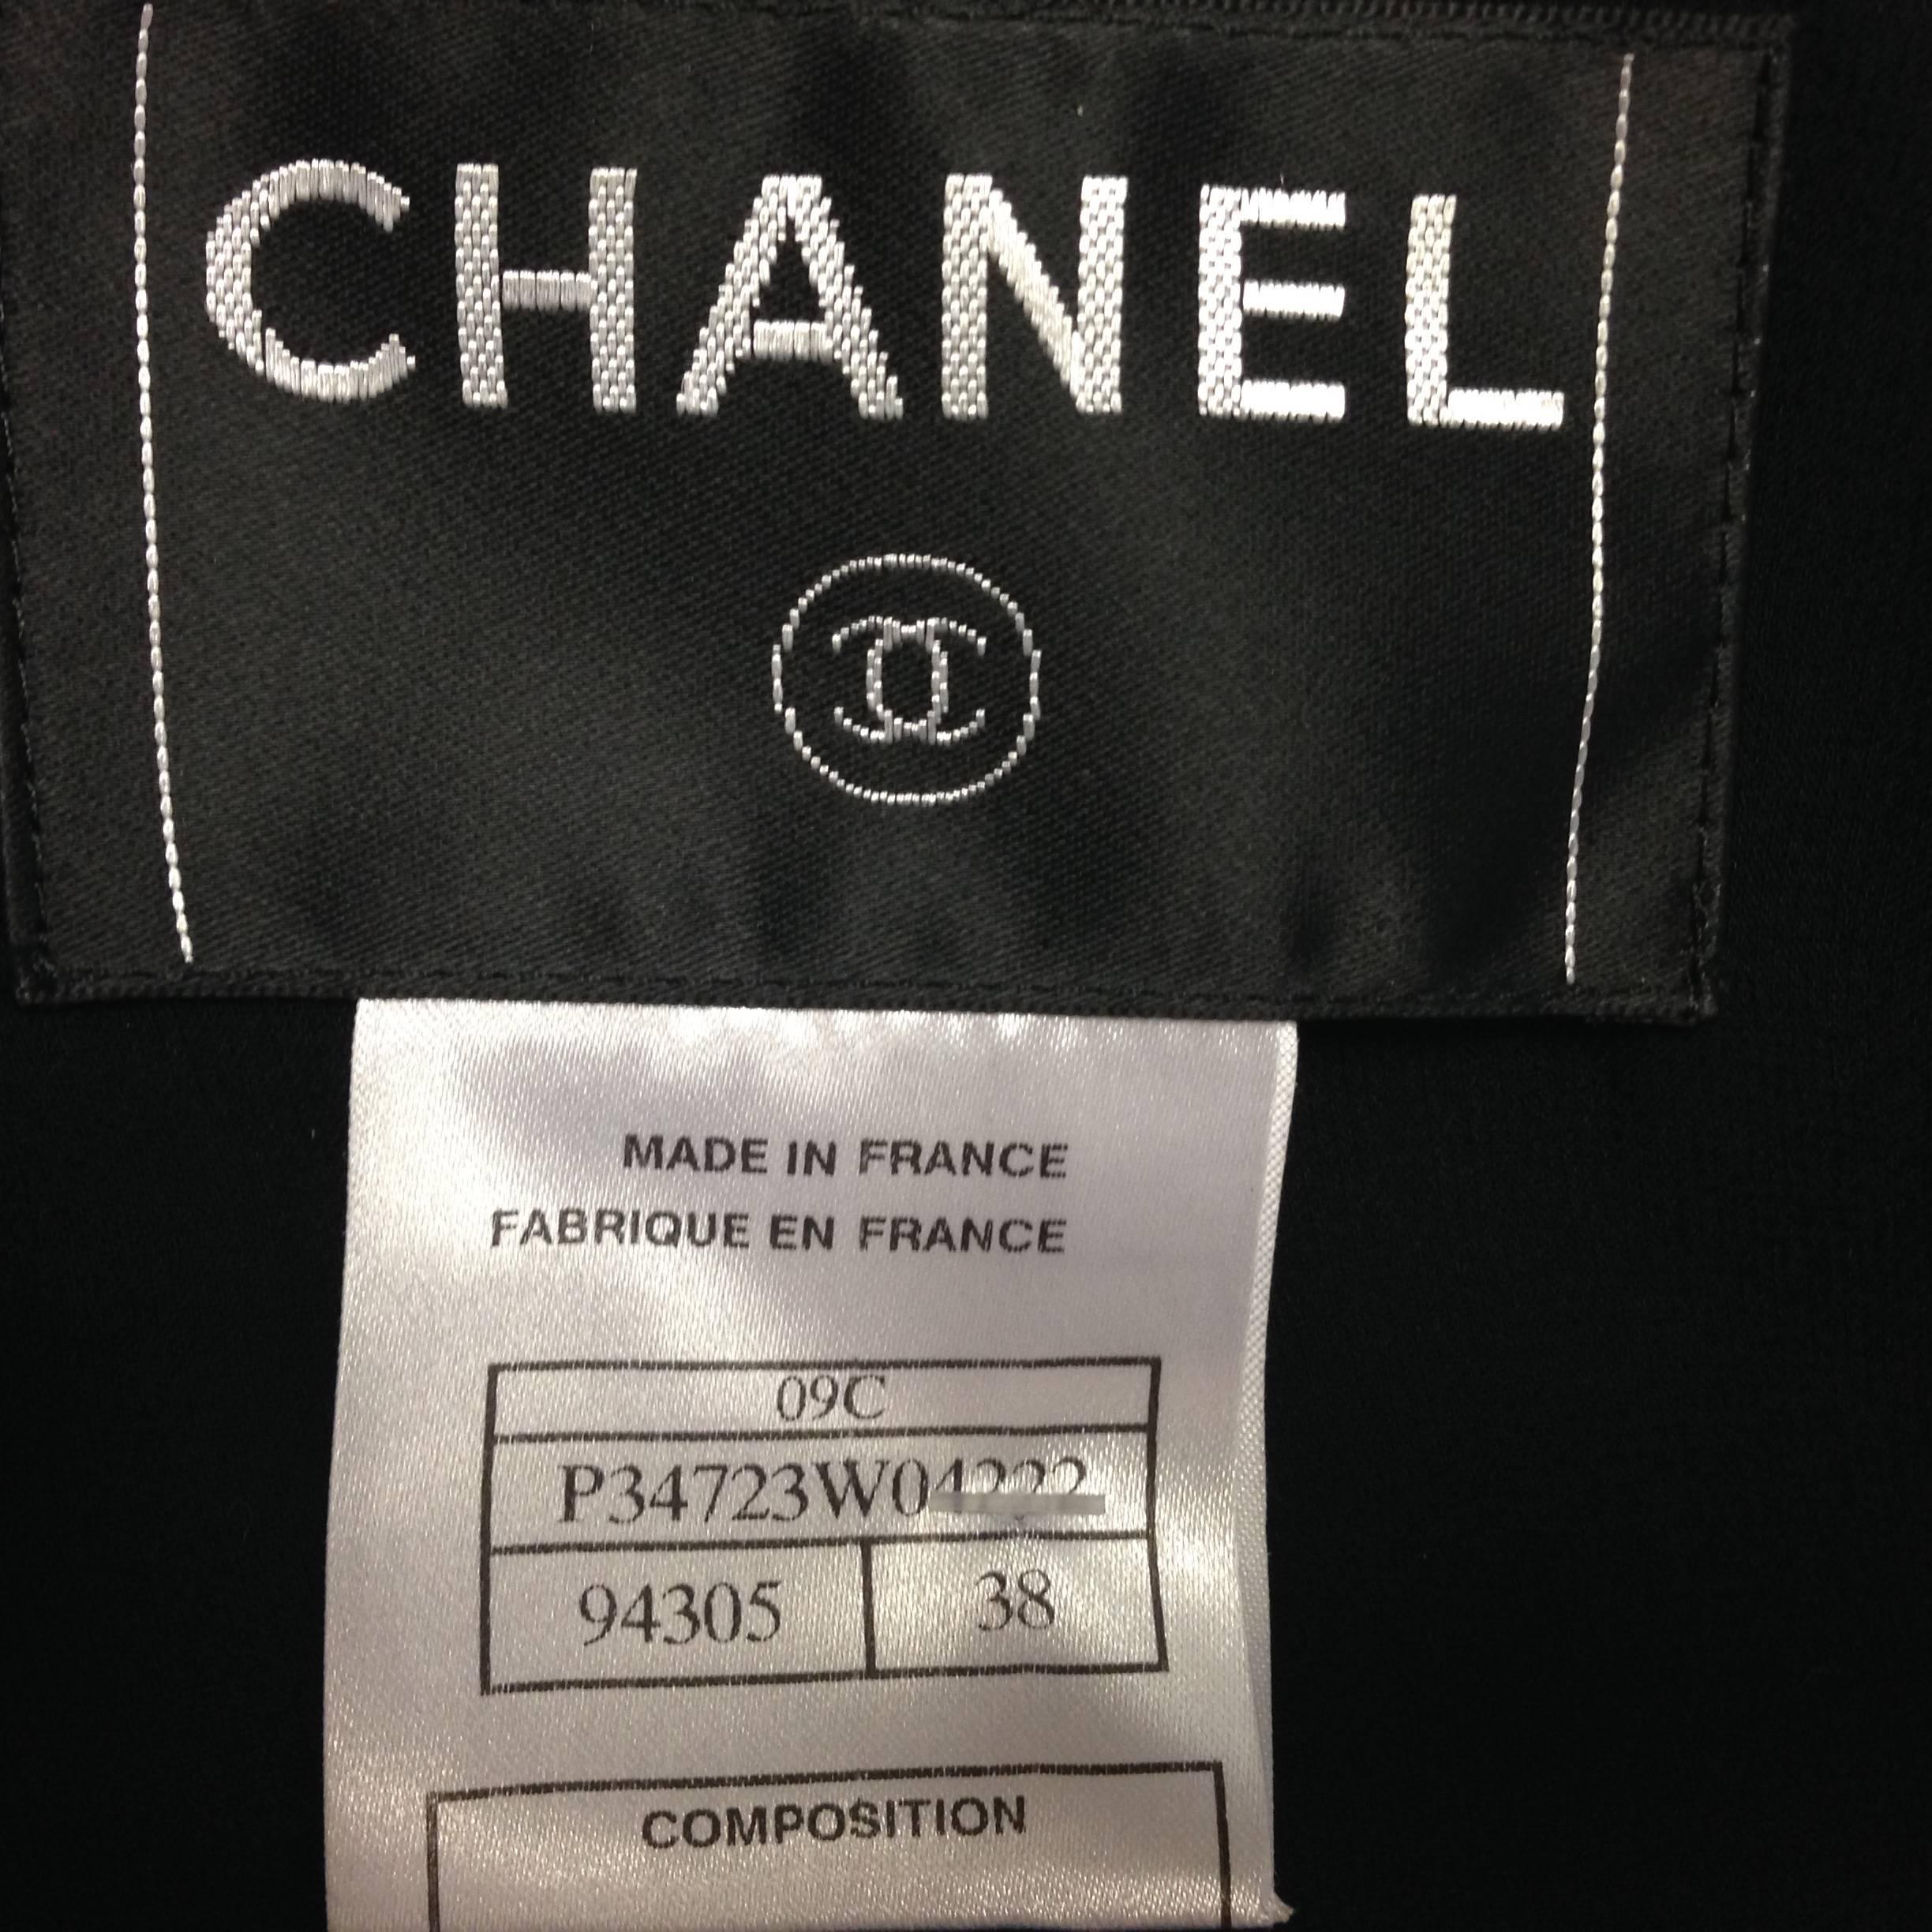 CHANEL Black Tweed and Lace Beaded Jacket 09C Size 38 3